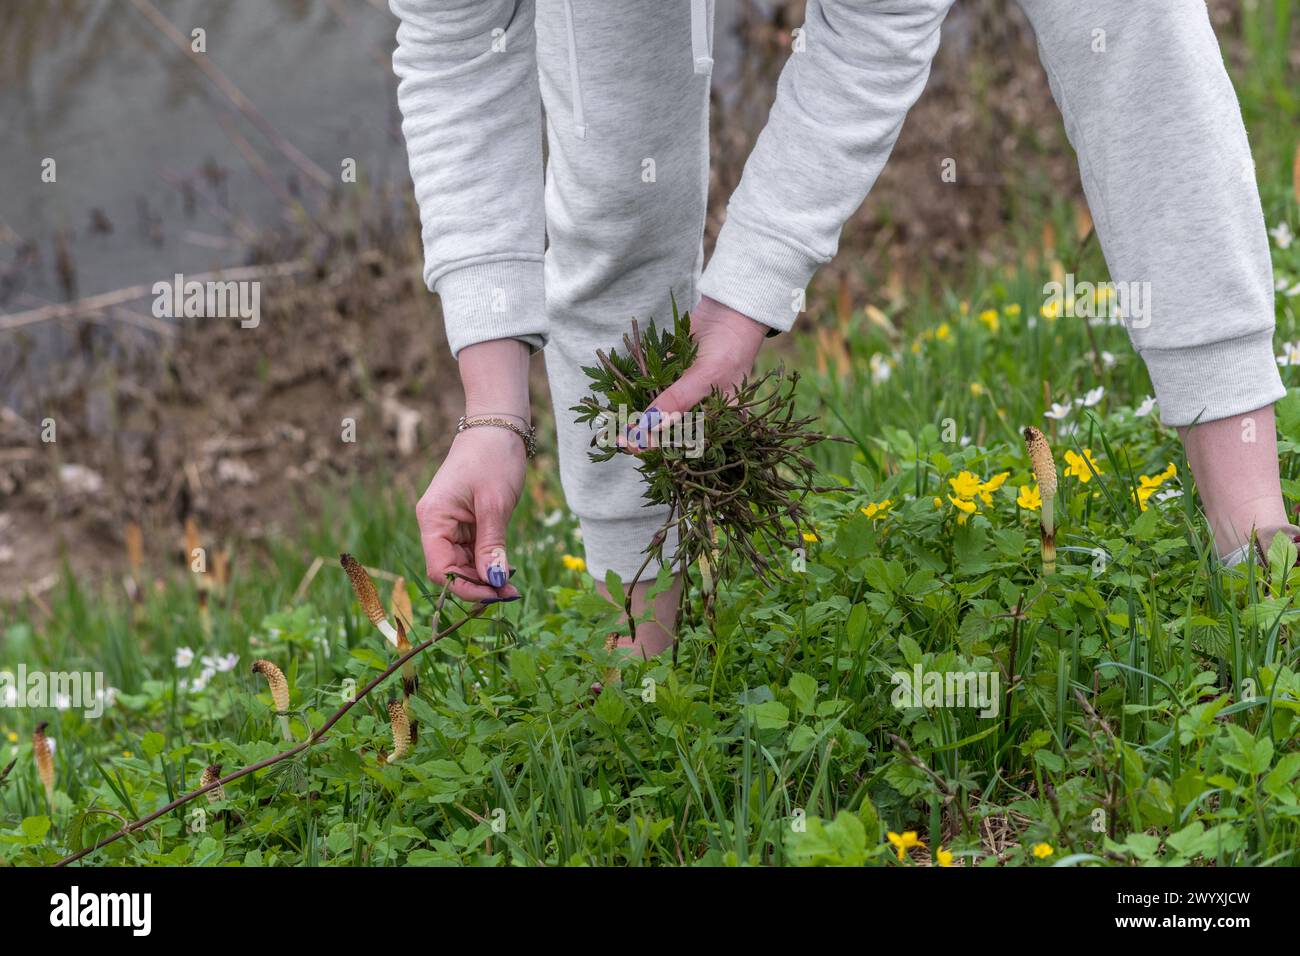 Woman collects Bruscandoli: wild herbs in a meadow in northern Italy where there are also horsetail plants (Equisetum telmateia). Perennial herbaceous Stock Photo